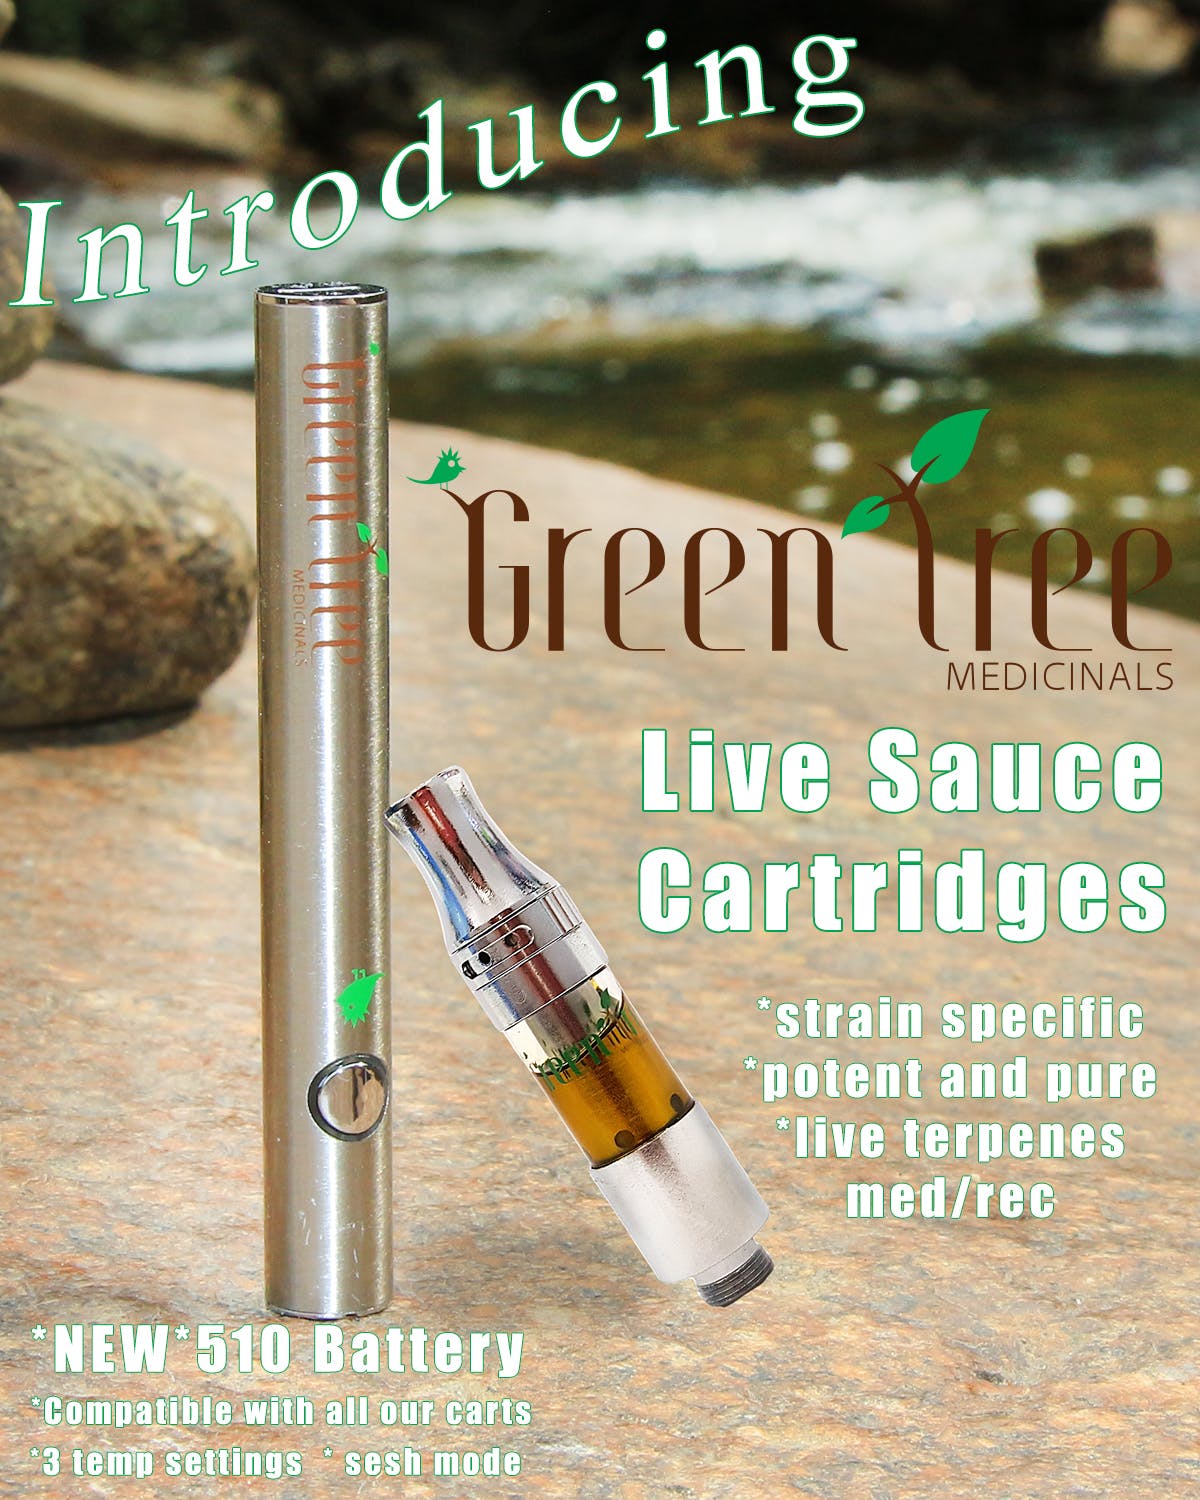 concentrate-con-green-tree-live-sauce-carts-500mg